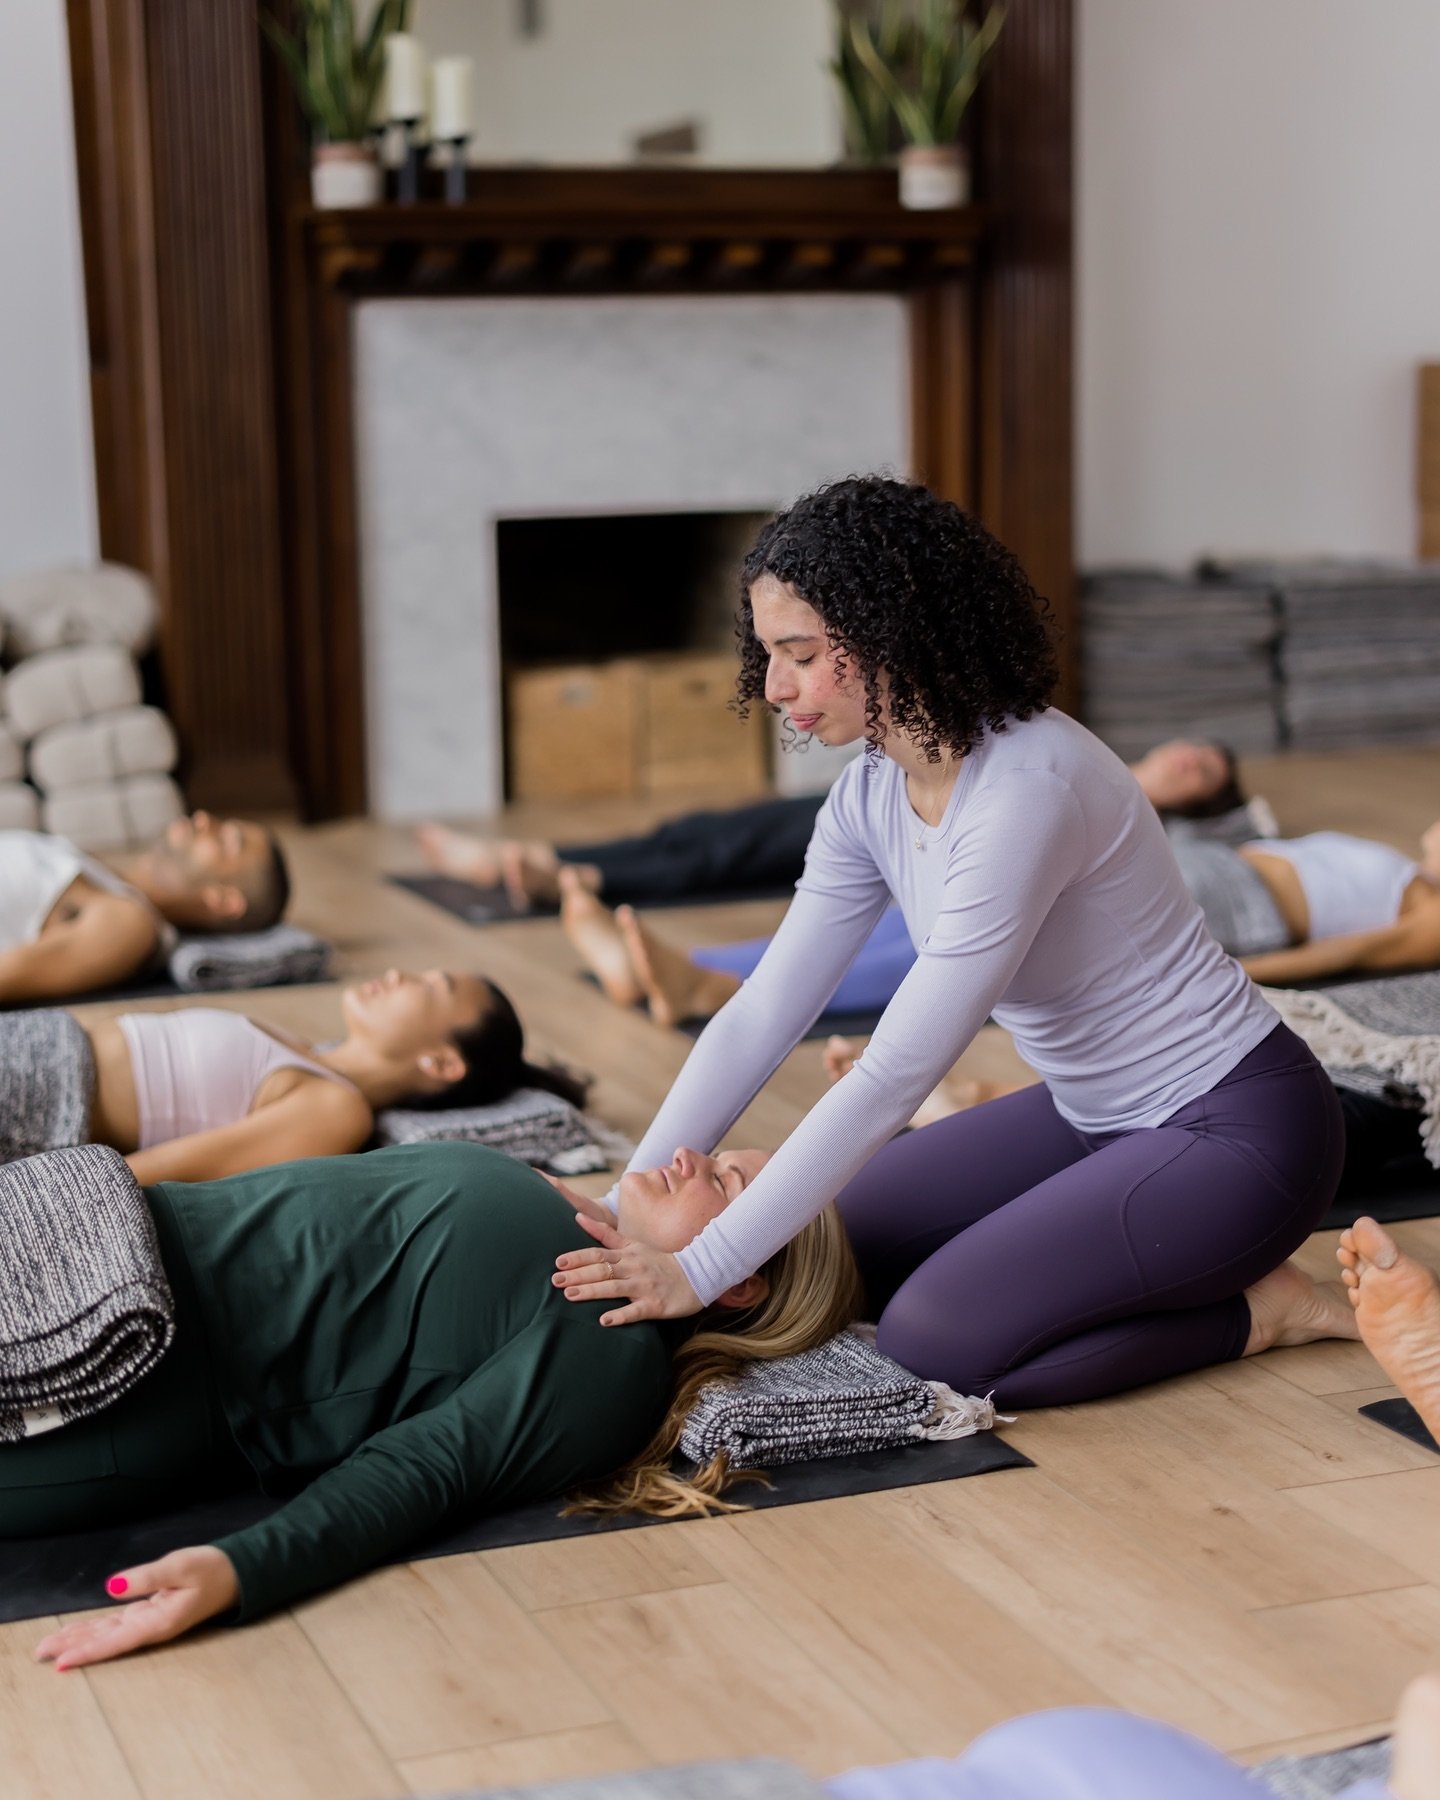 Last night in the wake of the eclipse, 30 students joined my yin yoga + sound meditation class, this feels significant since it wasn&rsquo;t always the case. ⏪

Yin yoga typically isn&rsquo;t the most popular class on the schedule. It&rsquo;s not fla